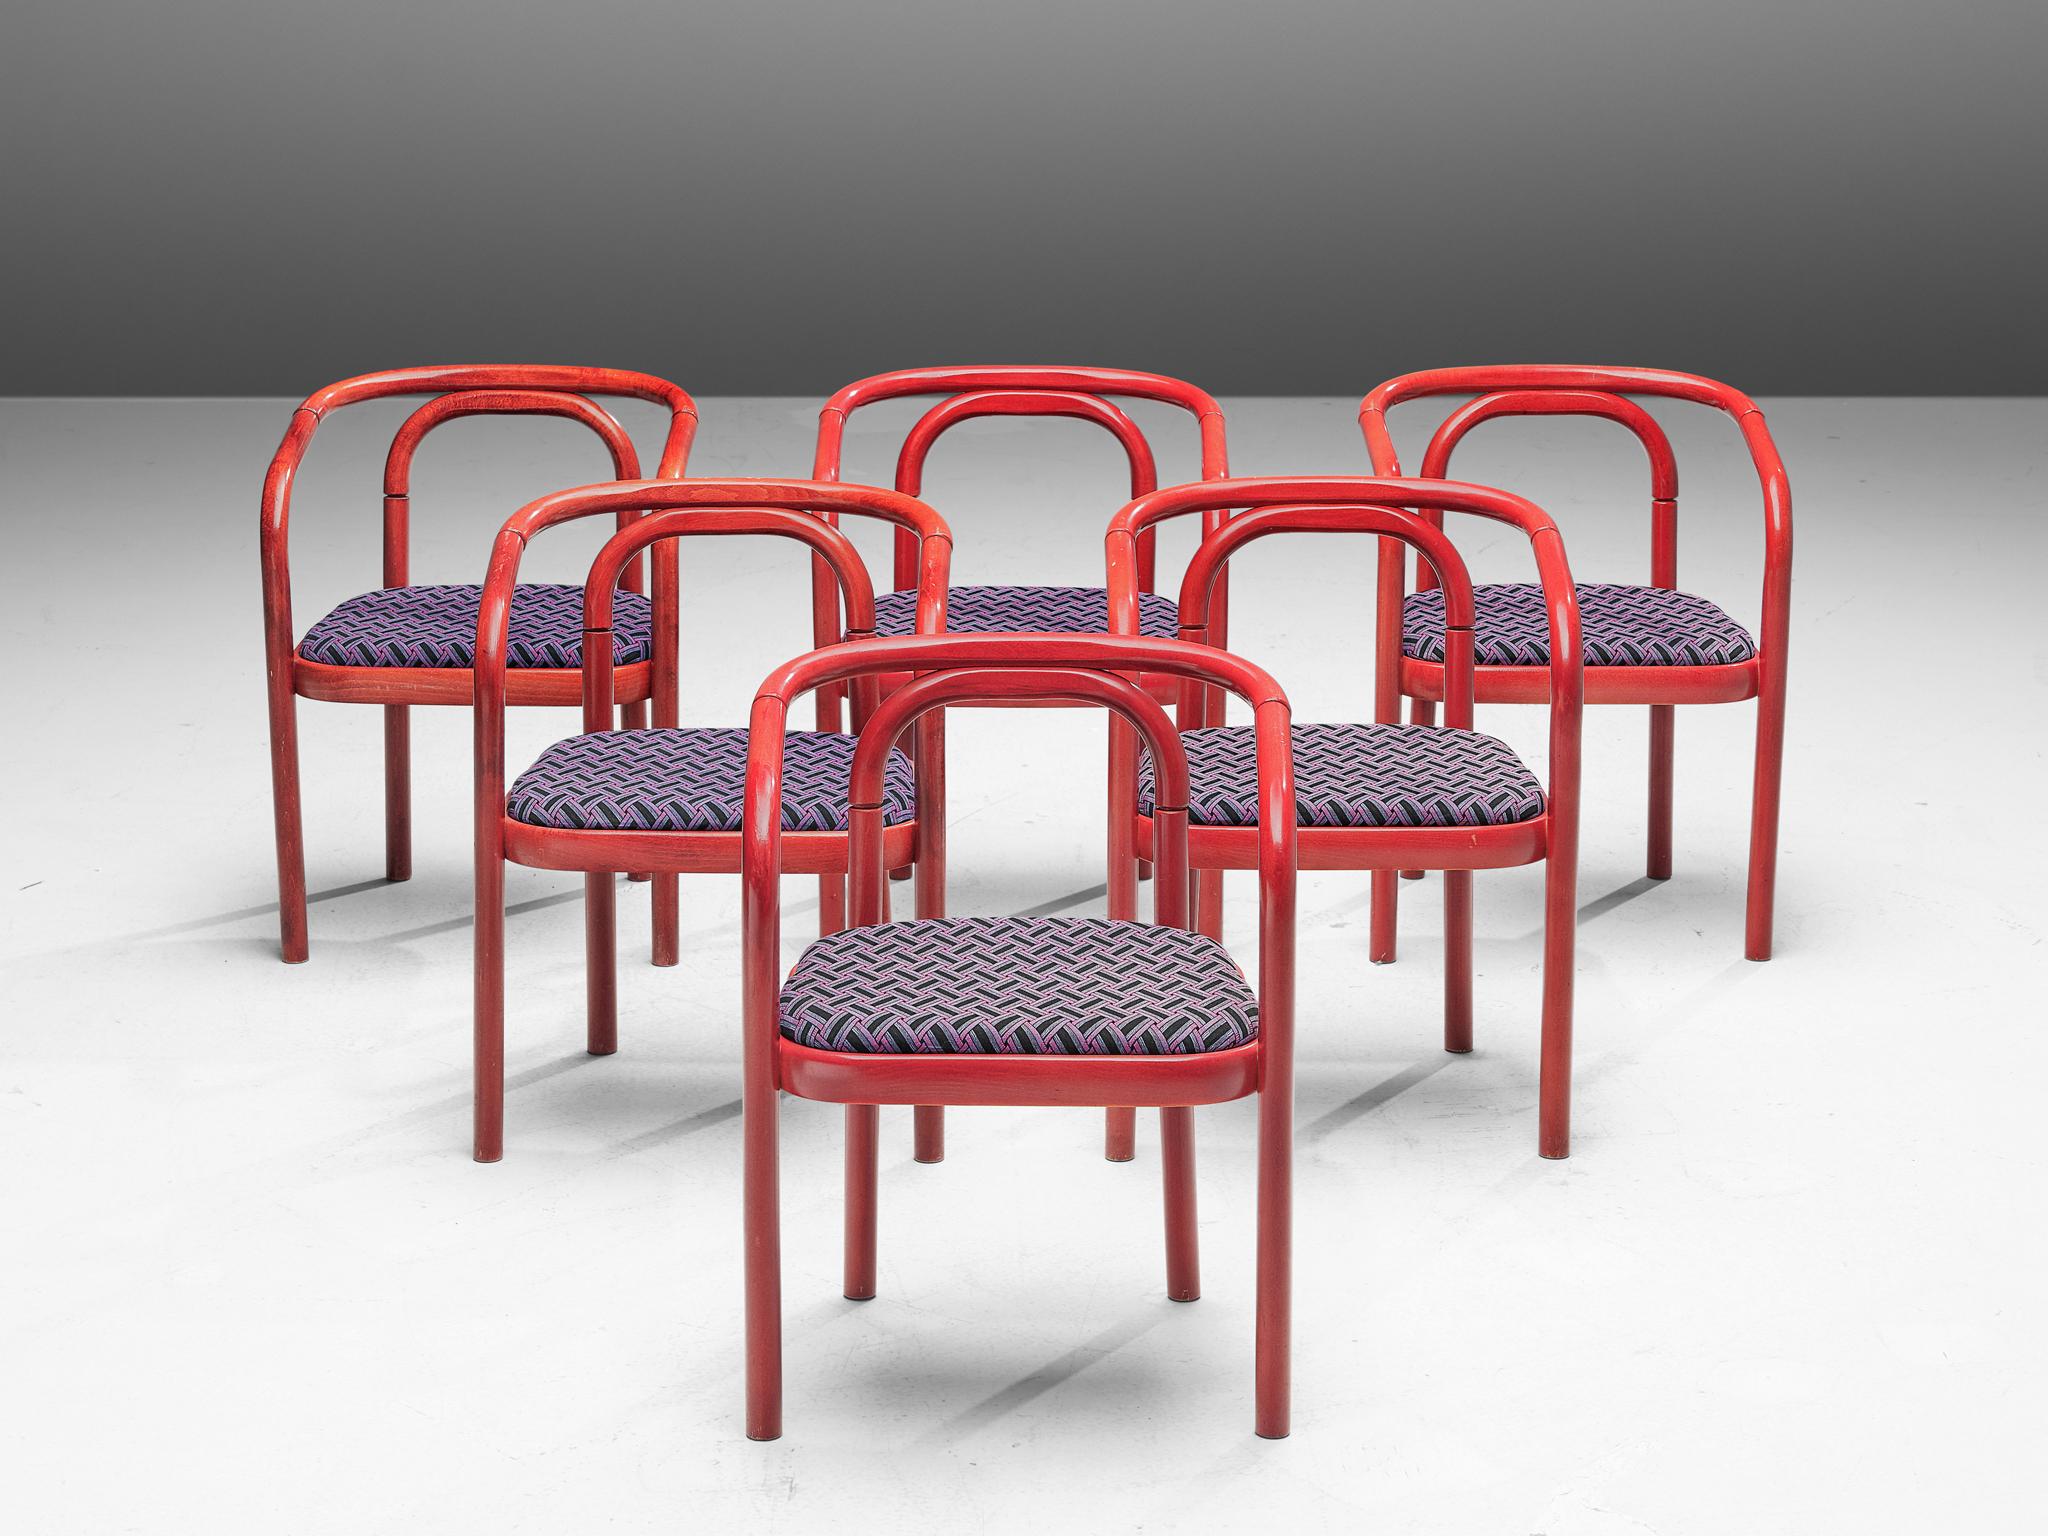 Czech Large Set of Ton Chairs with Red Wooden Frames +75